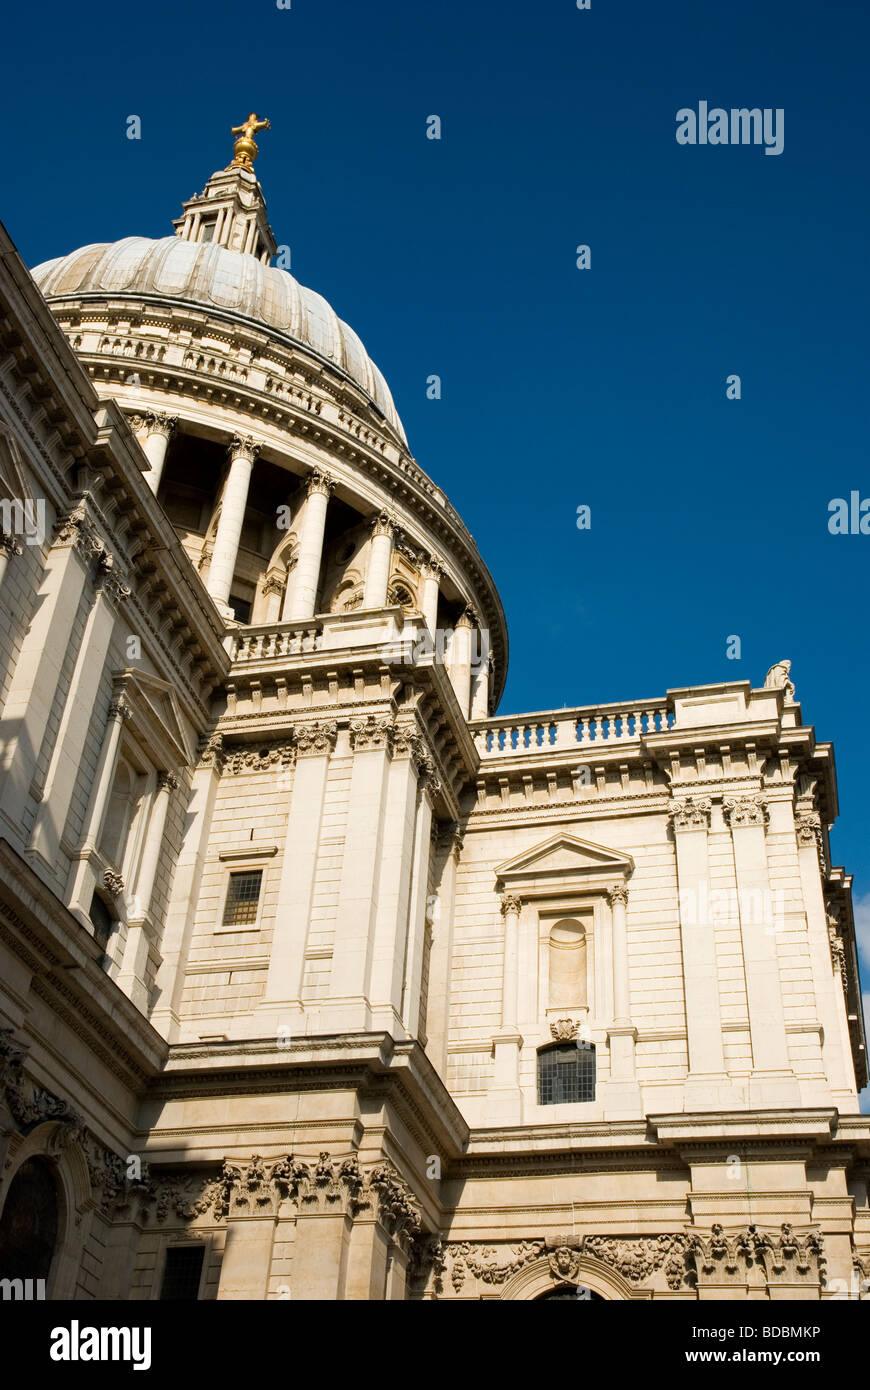 The dome of St Paul's Cathedral against the blue sky in city of London England UK Stock Photo